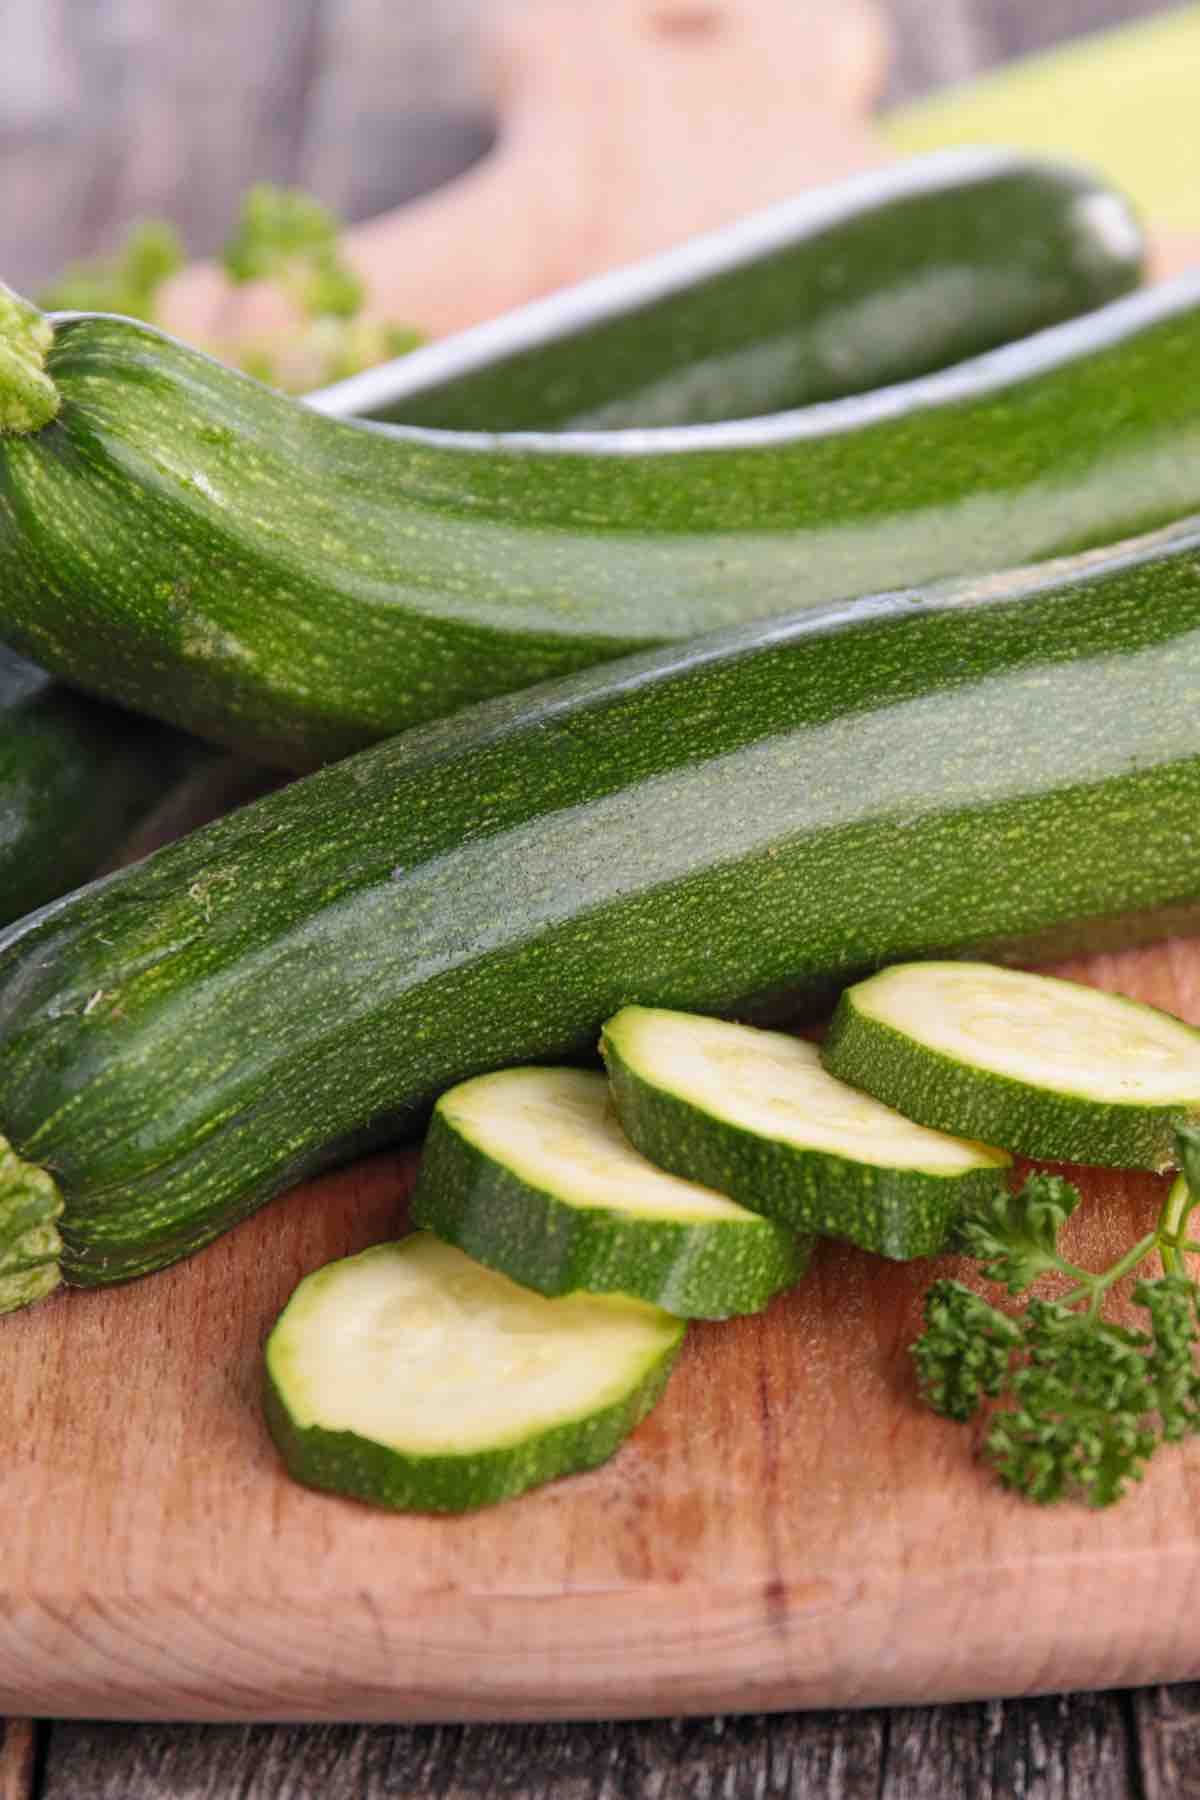 Even picky eaters won’t be able to resist these zucchini recipes. From bread to muffins to delicious pasta dishes, this list provides you with endless recipes perfect for breakfast, lunch, dinner, and even those snack times in between! So go on, enjoy because you’ll even find some gluten-free and keto-friendly recipes here too!